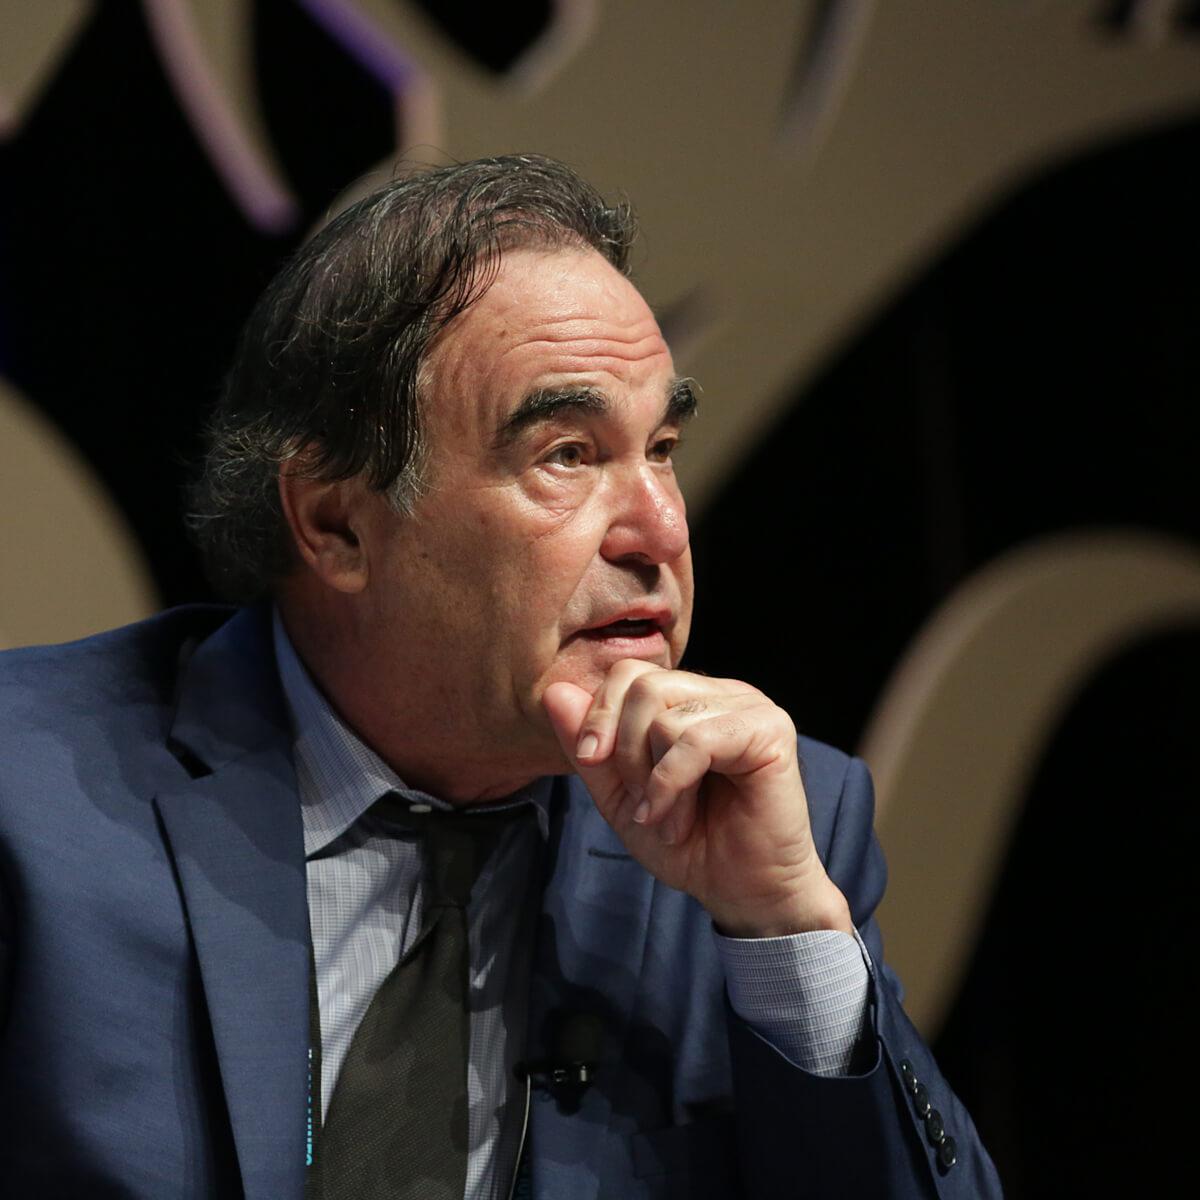 Portrait of American writer and filmmaker, Oliver Stone by photographer Julian Hanford